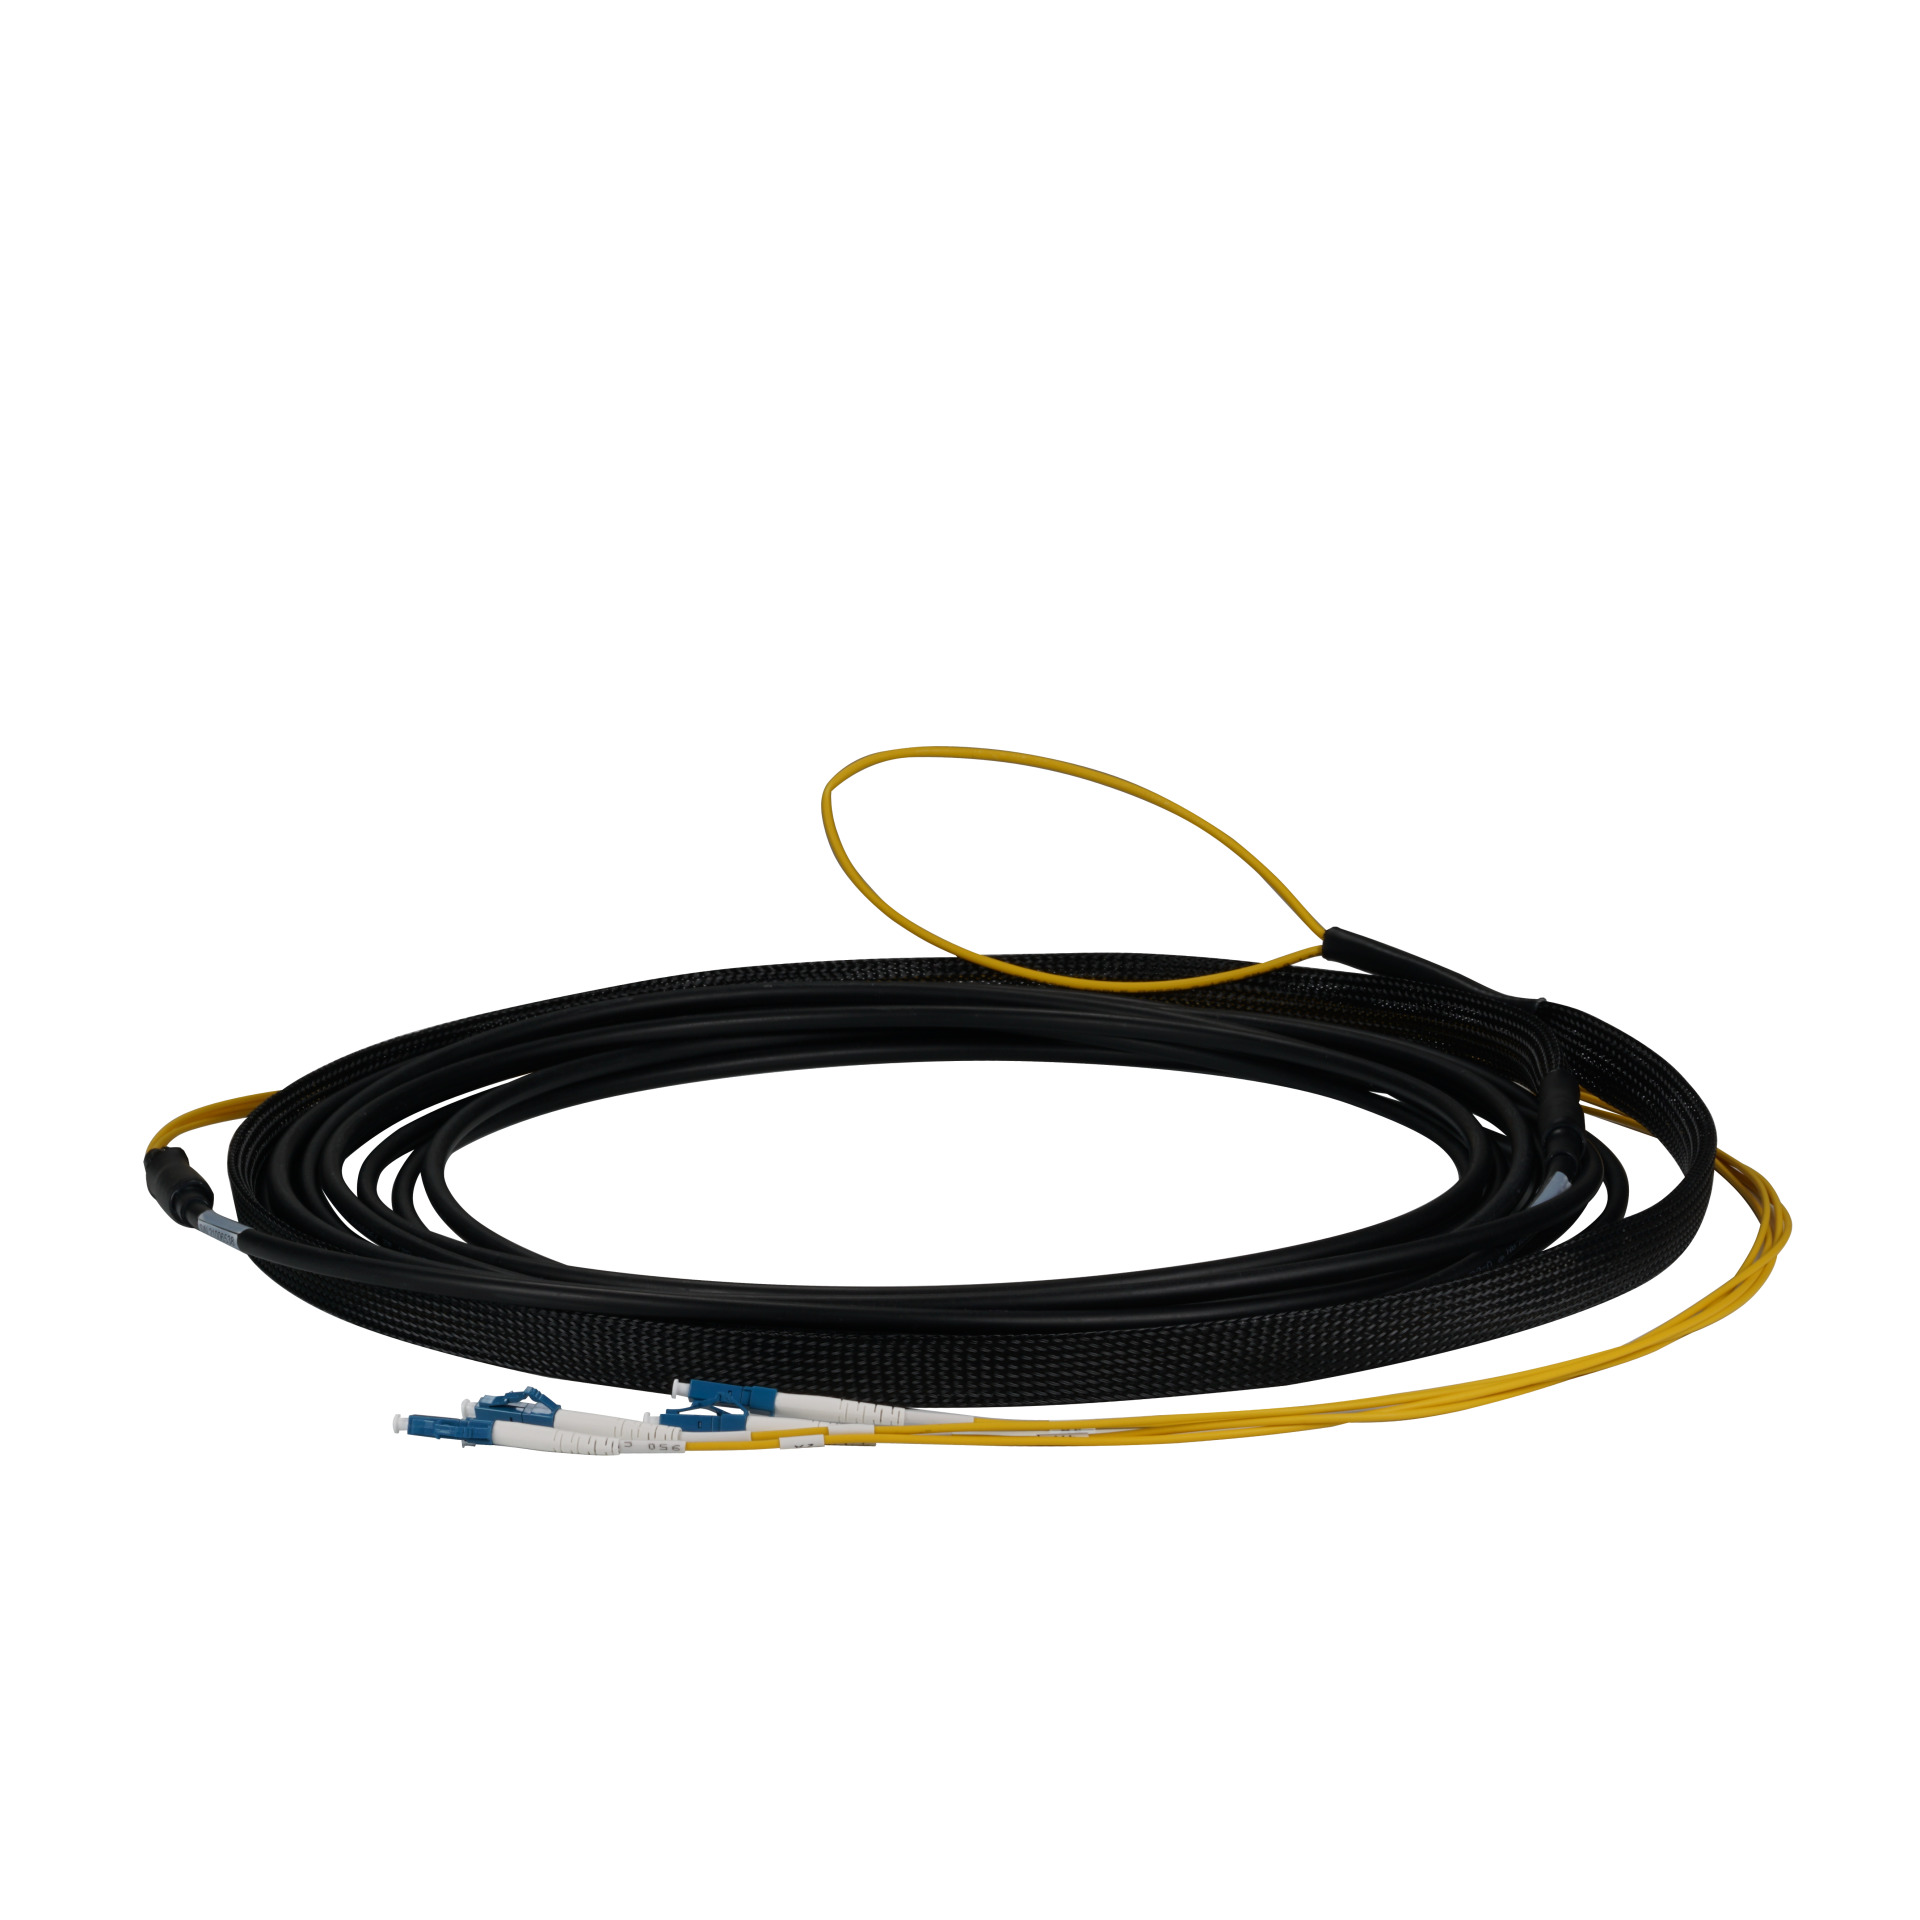 Trunk cable U-DQ(ZN)BH 12E 9/125, LC/LC OS2 160m